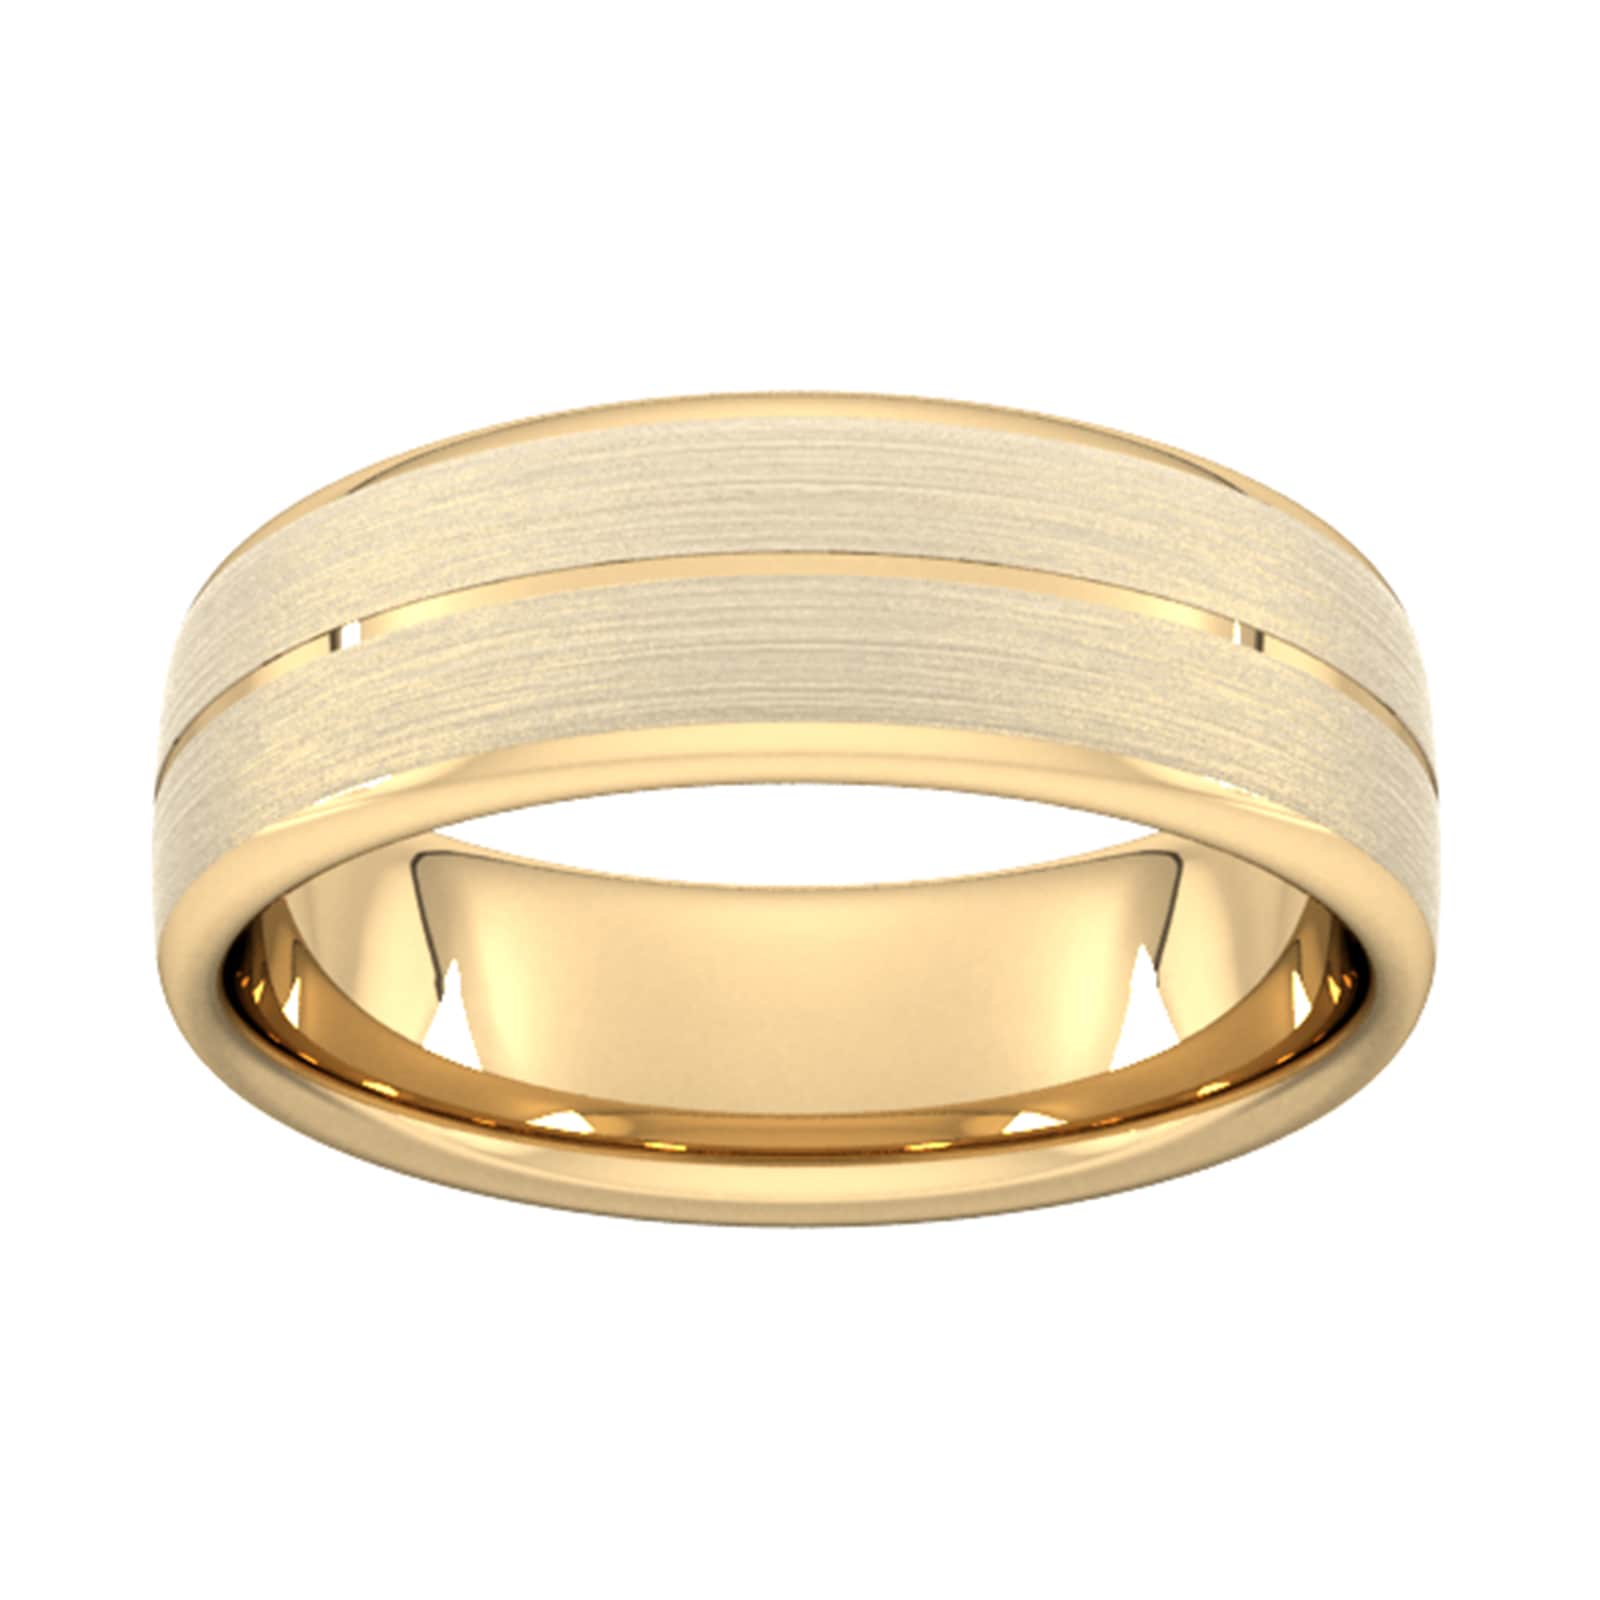 7mm Slight Court Standard Centre Groove With Chamfered Edge Wedding Ring In 18 Carat Yellow Gold - Ring Size W